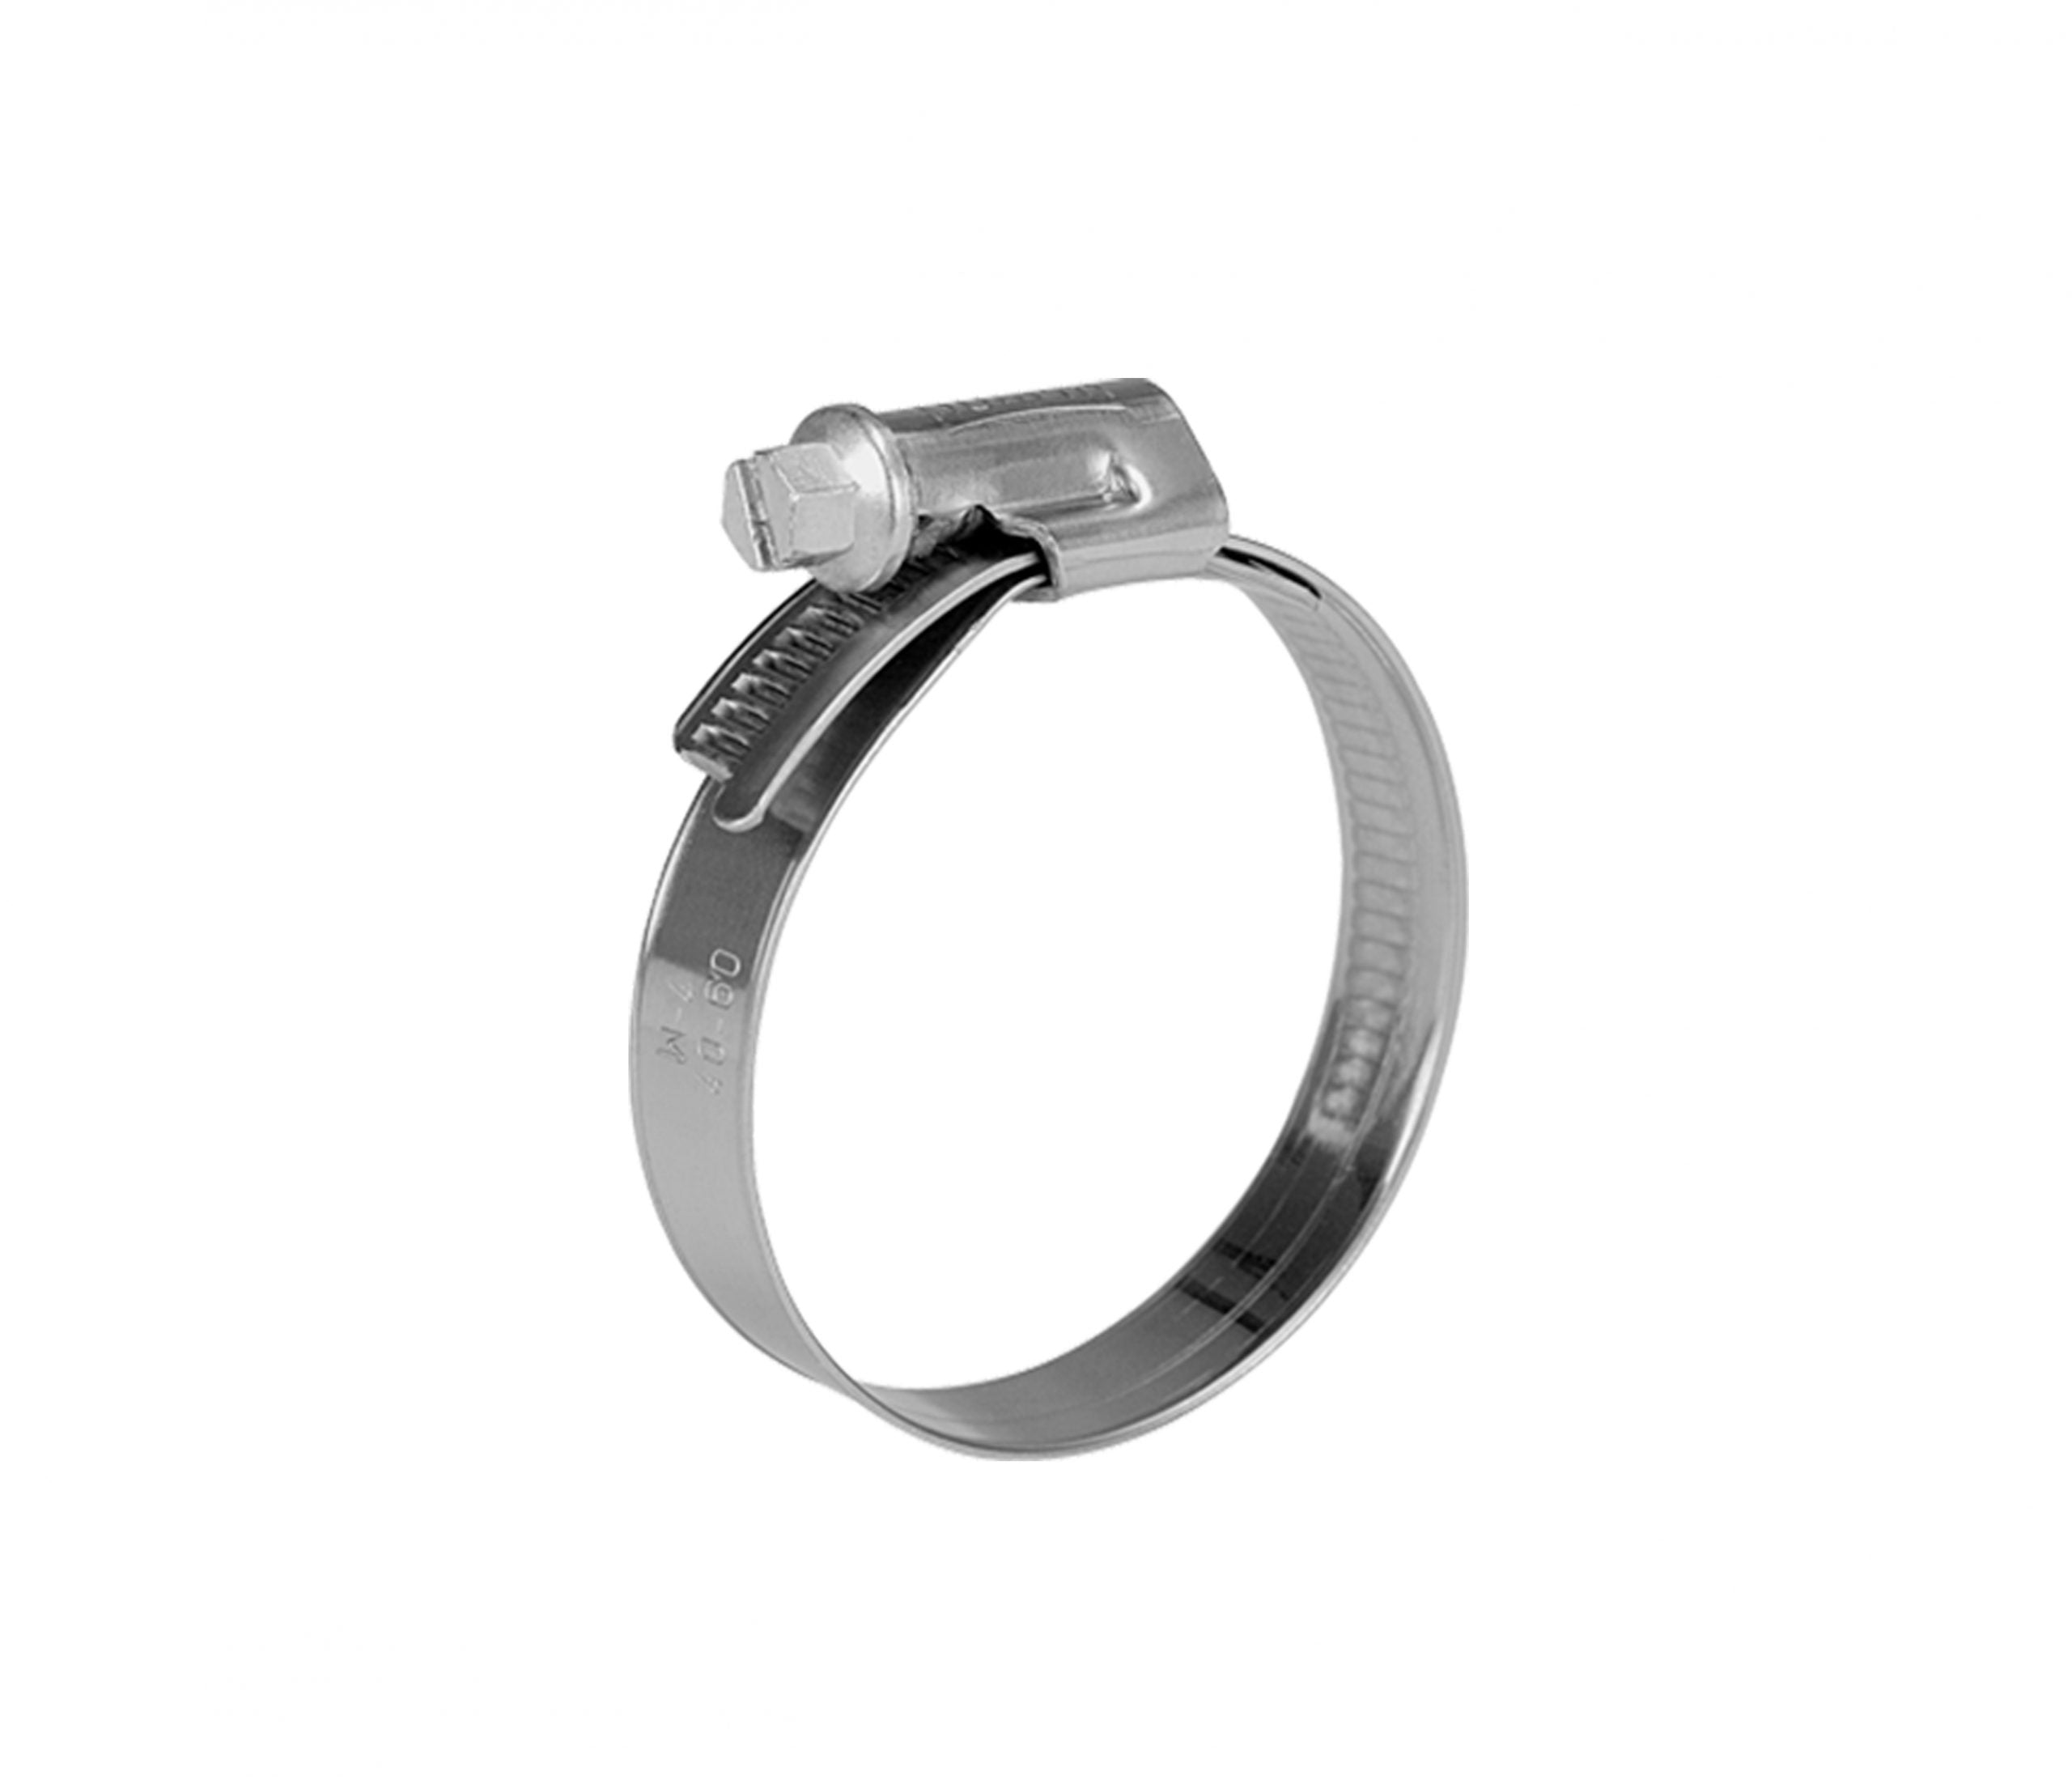 60-80mm Stainless Steel Hose Clamp with Worm Drive 722-6080 by Norma